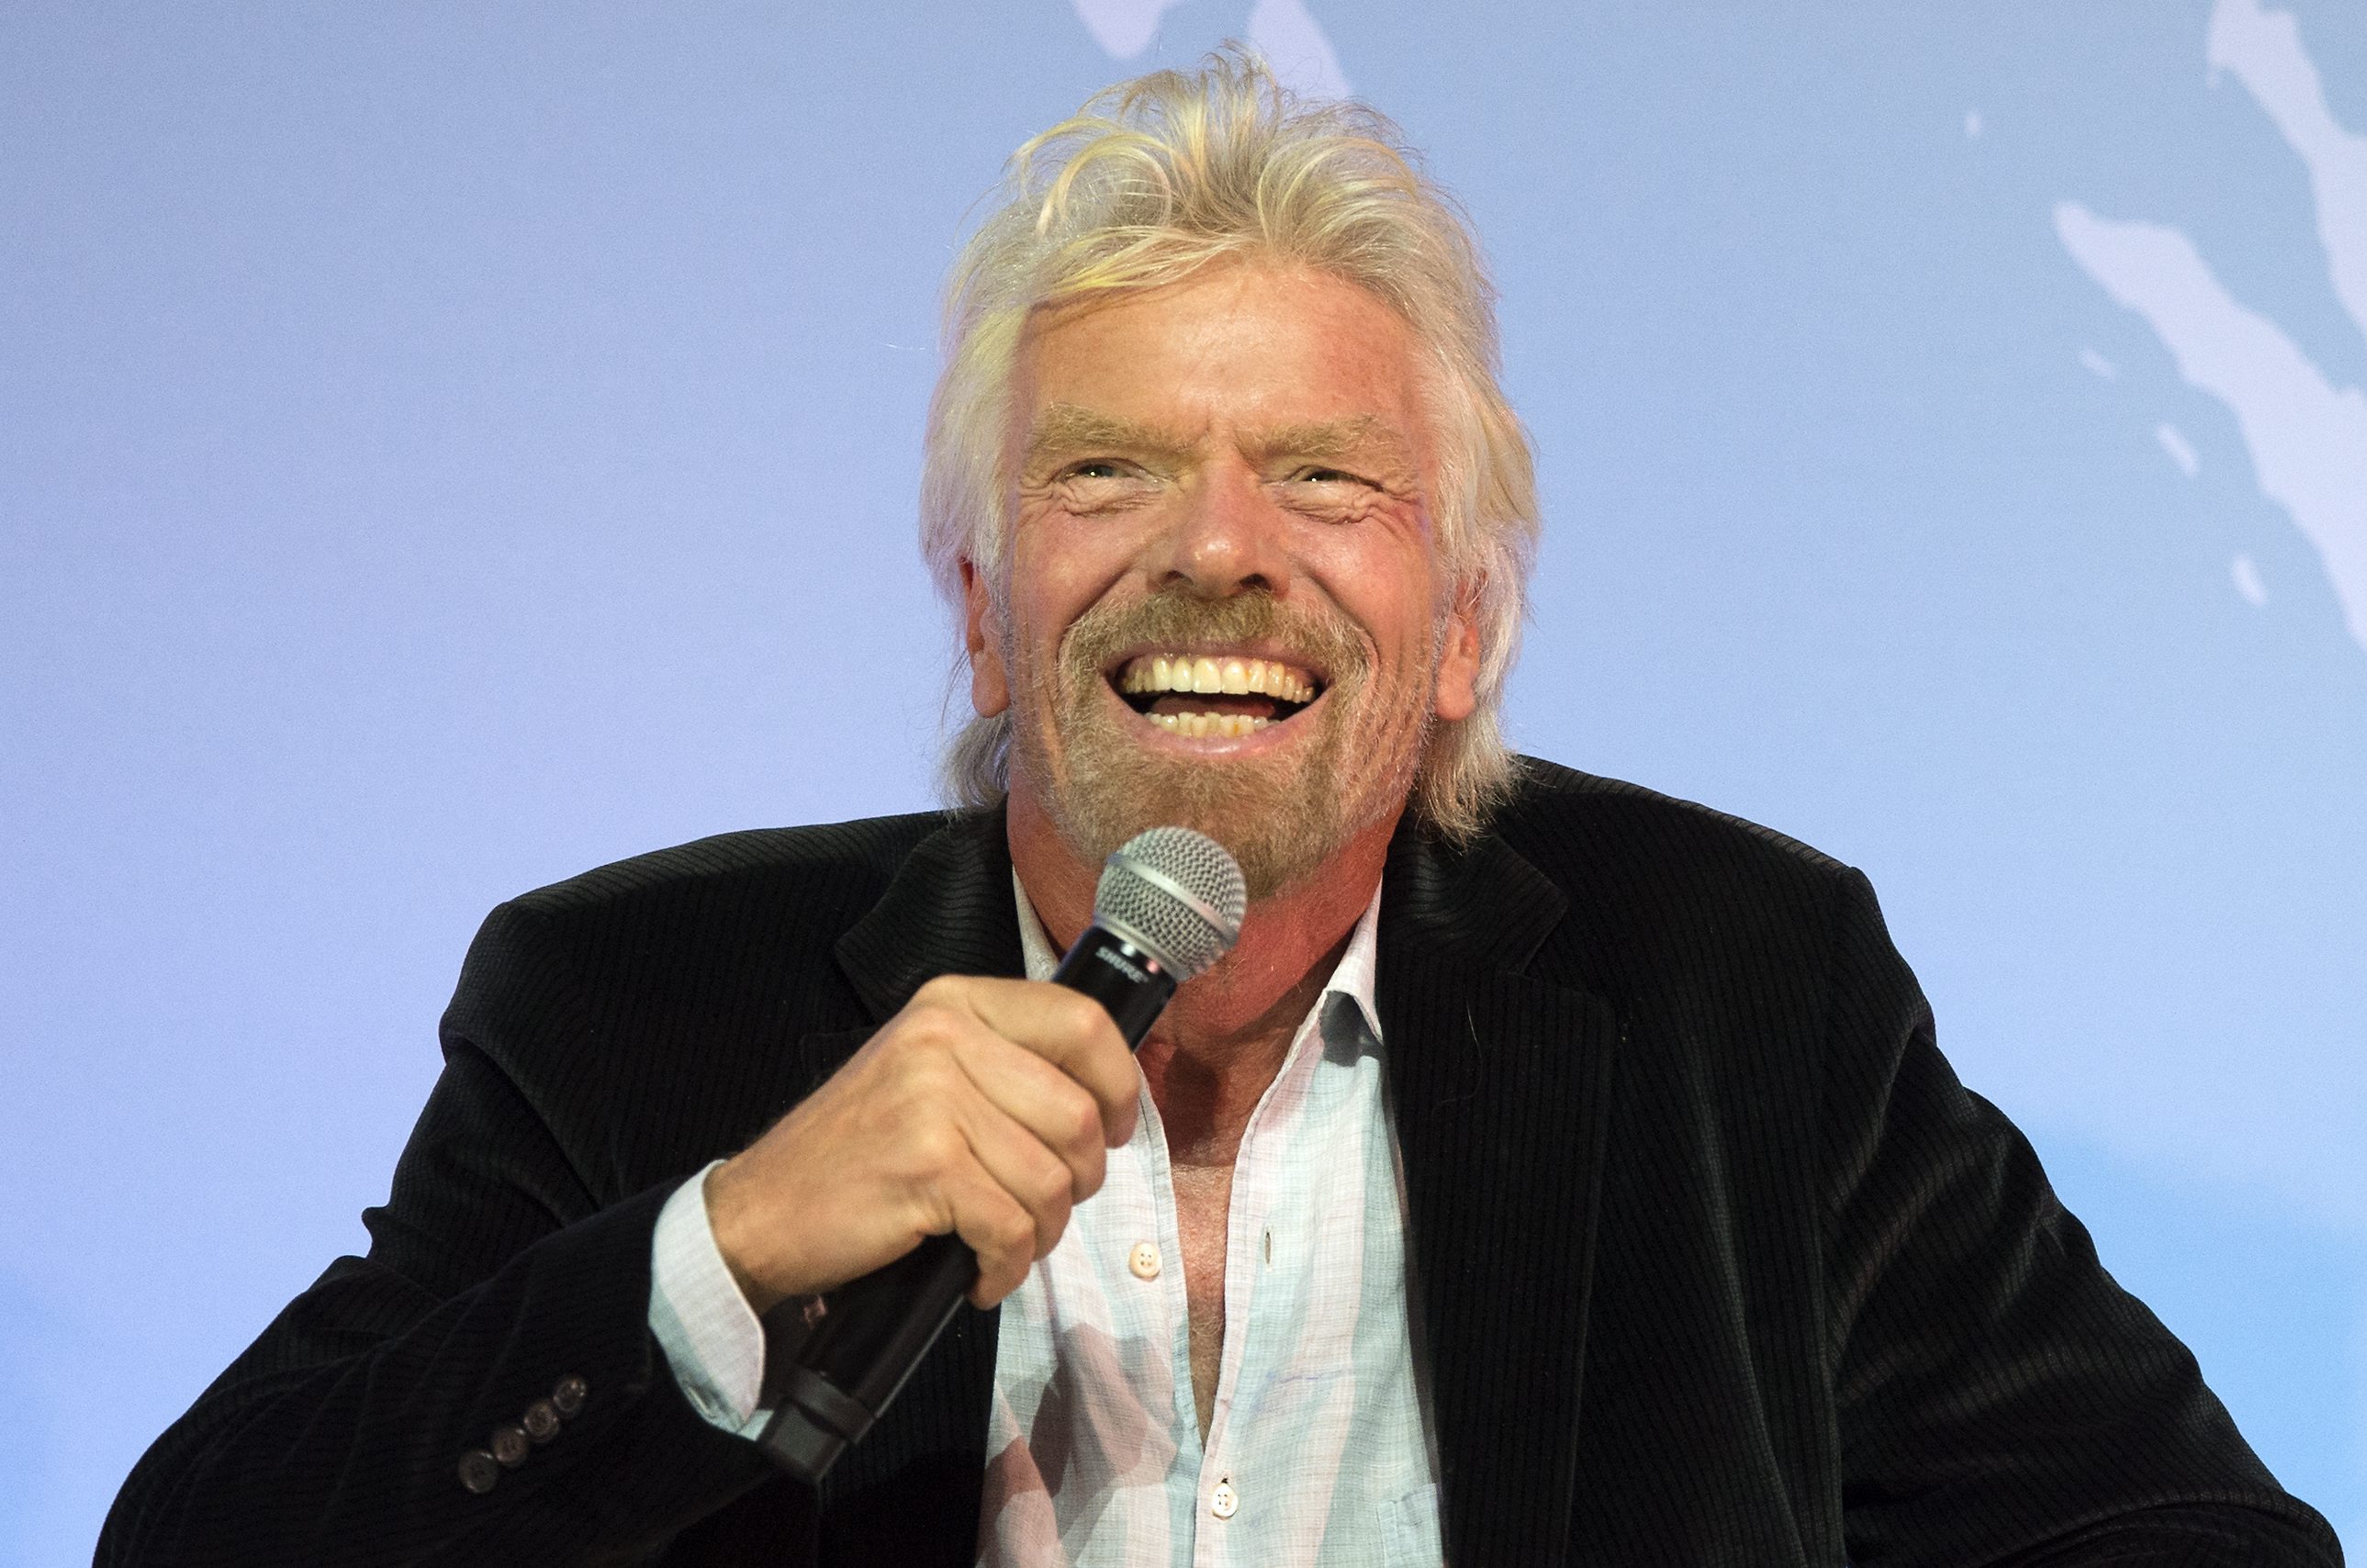 2016-10-26 13:16:35 epa05604031 British entrepreneur Richard Branson smiles during an event called 'Leadership in science and innovation - good for Britain, good for the world' at the Methodist Hall in London, Britain, 26 October 2016. The discussion was attended by Bill Gates, Sir Richard Branson and the Secretary of State for International Development, Priti Patel. EPA/FACUNDO ARRIZABALAGA